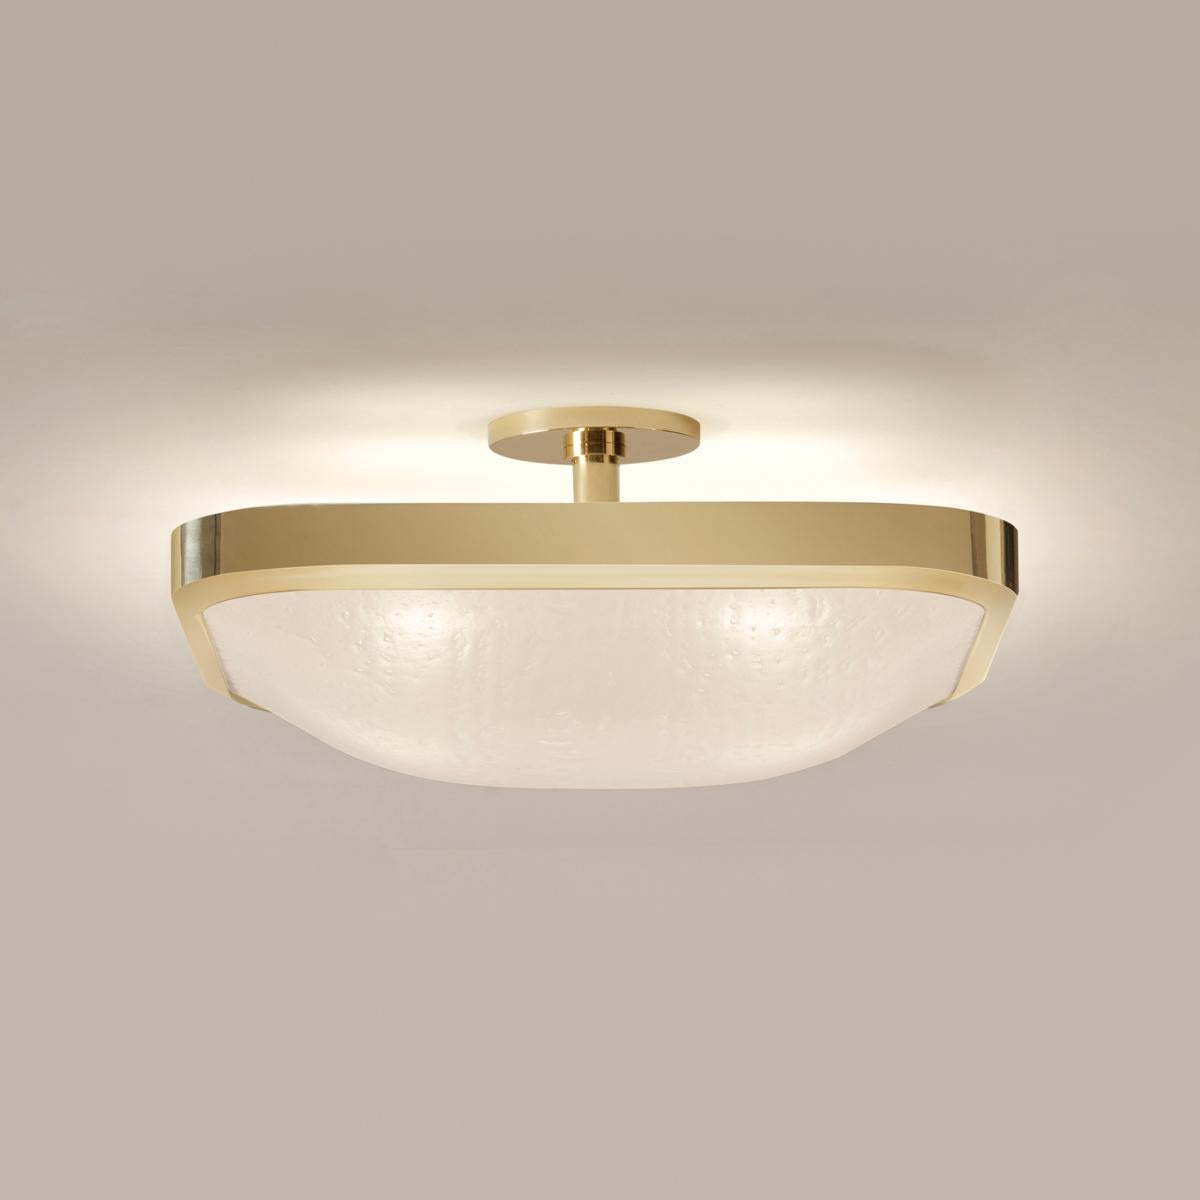 Uno Square Ceiling Light by Gaspare Asaro-Alpine Green and Satin Brass Finish In New Condition For Sale In New York, NY